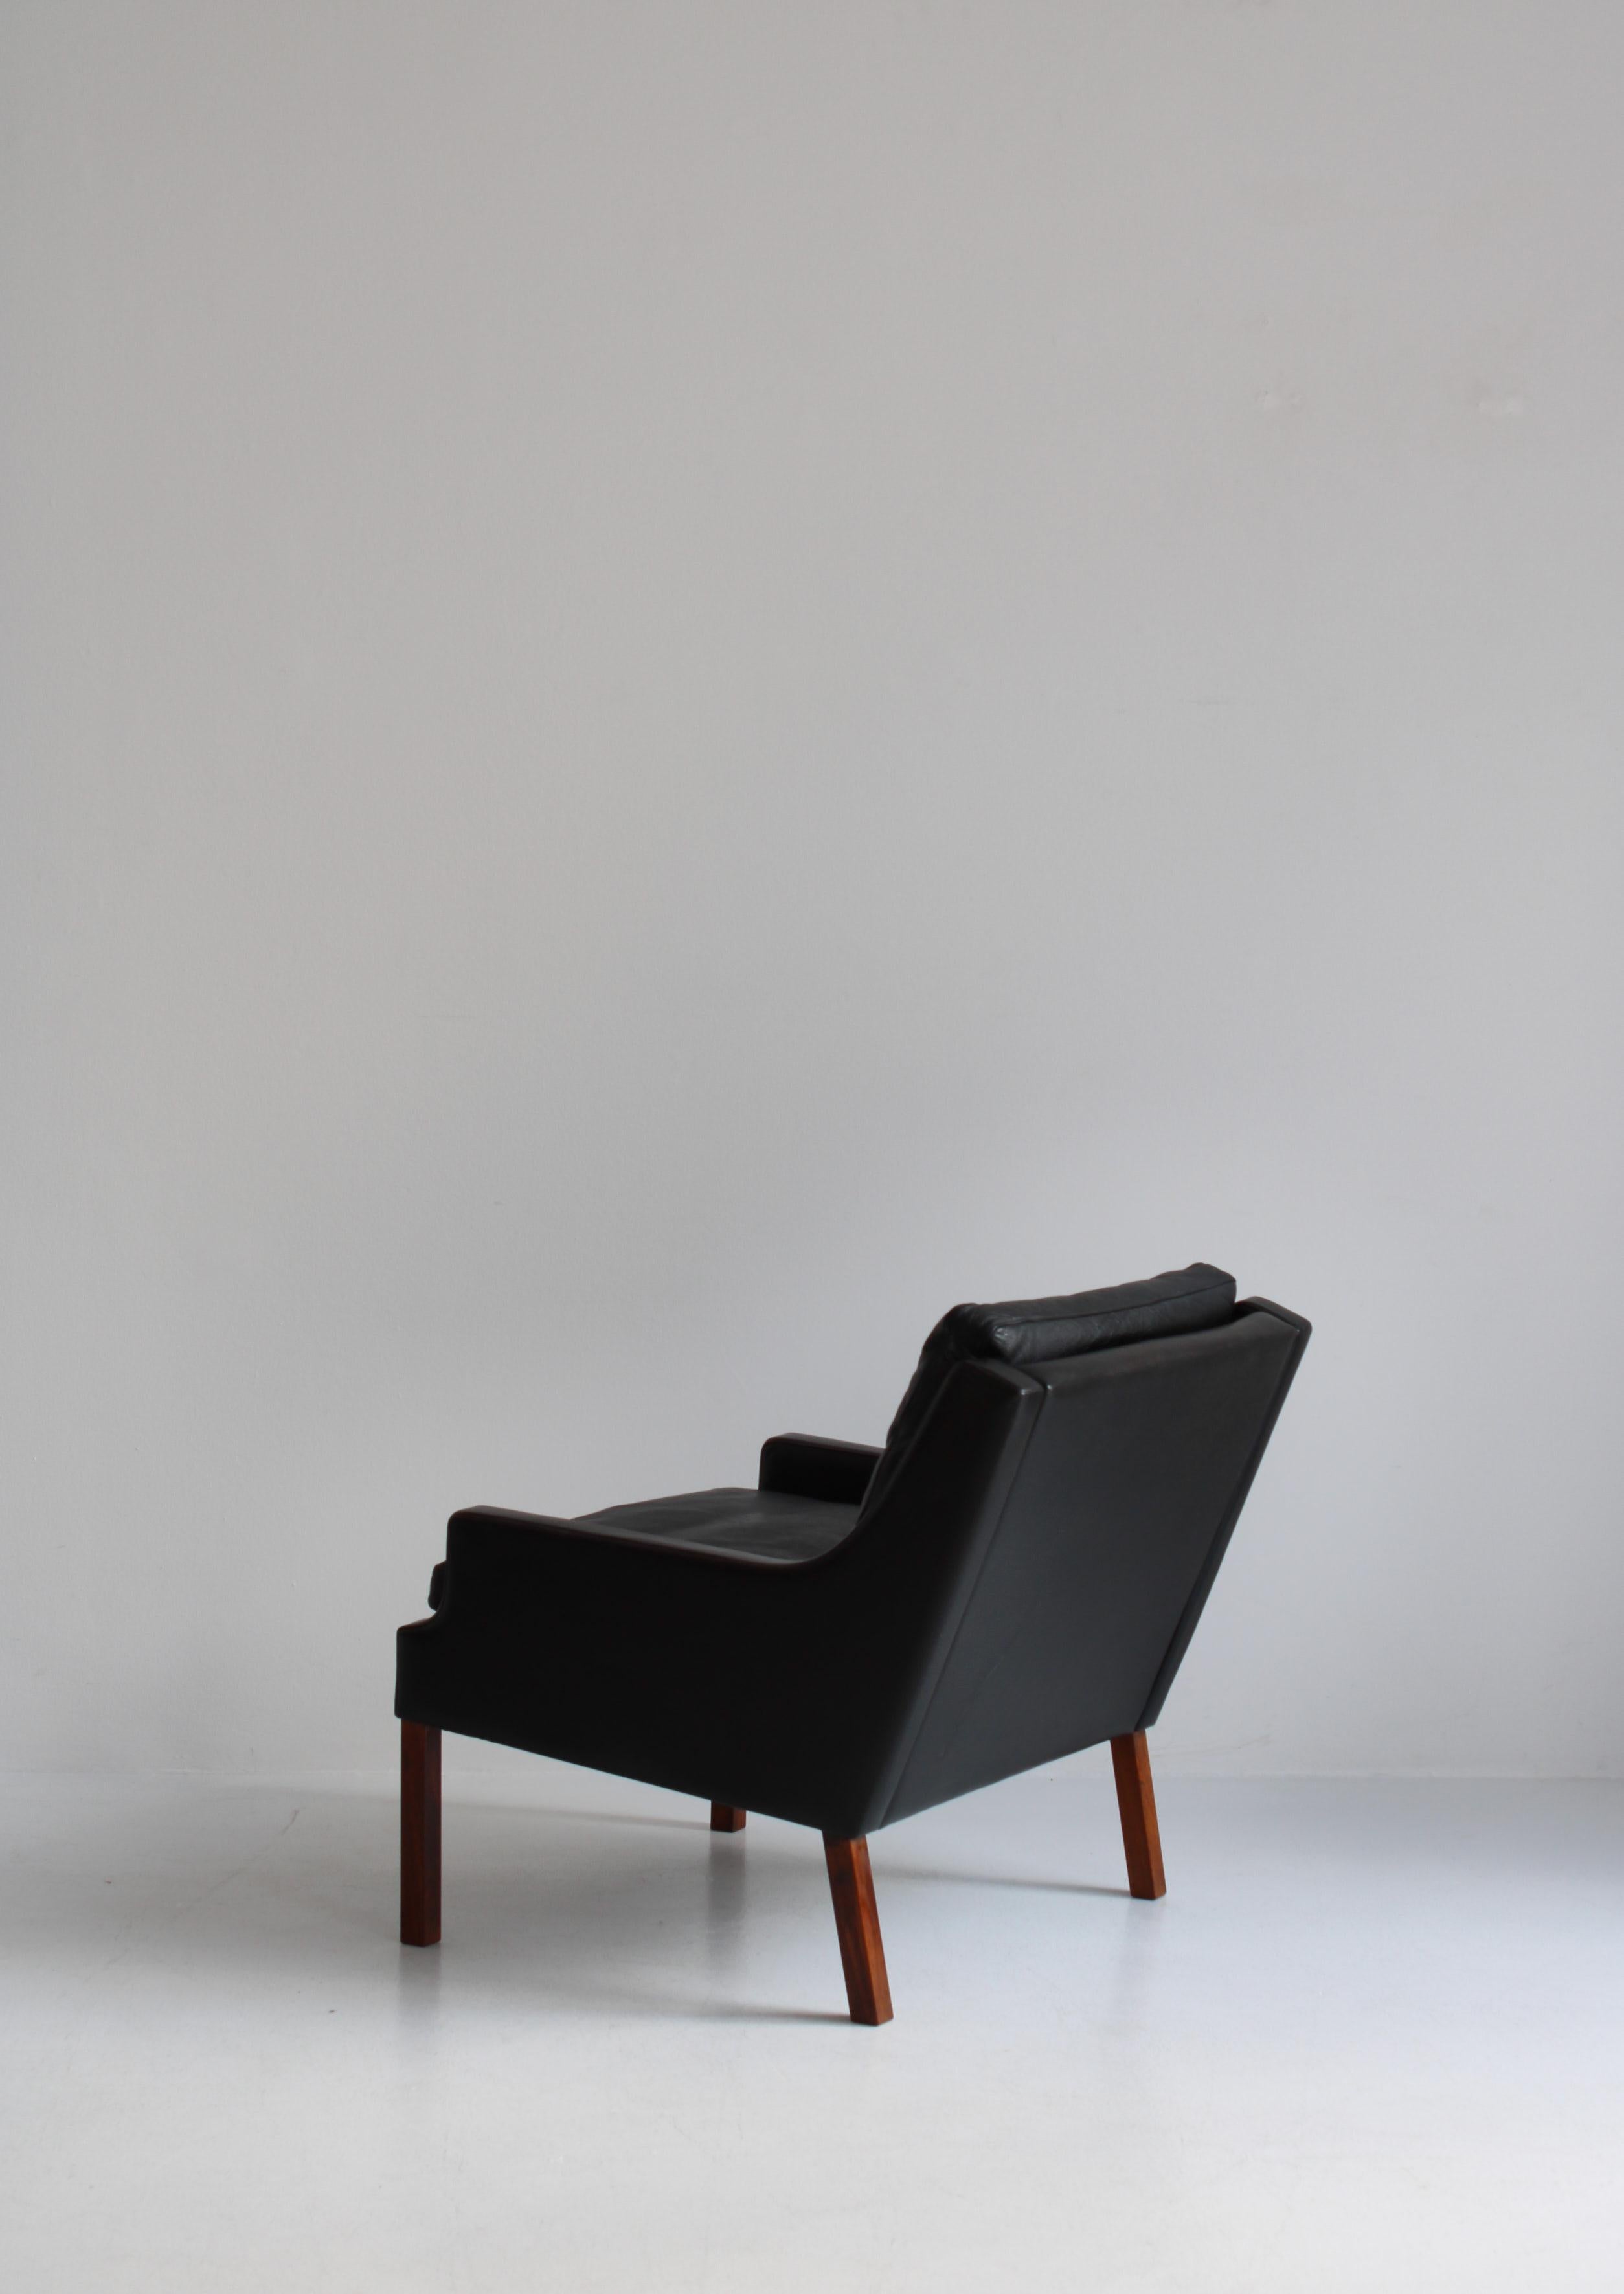 Mid-20th Century Set of Danish Modern Lounge Chairs in Black Leather by Rud Thygesen, 1966